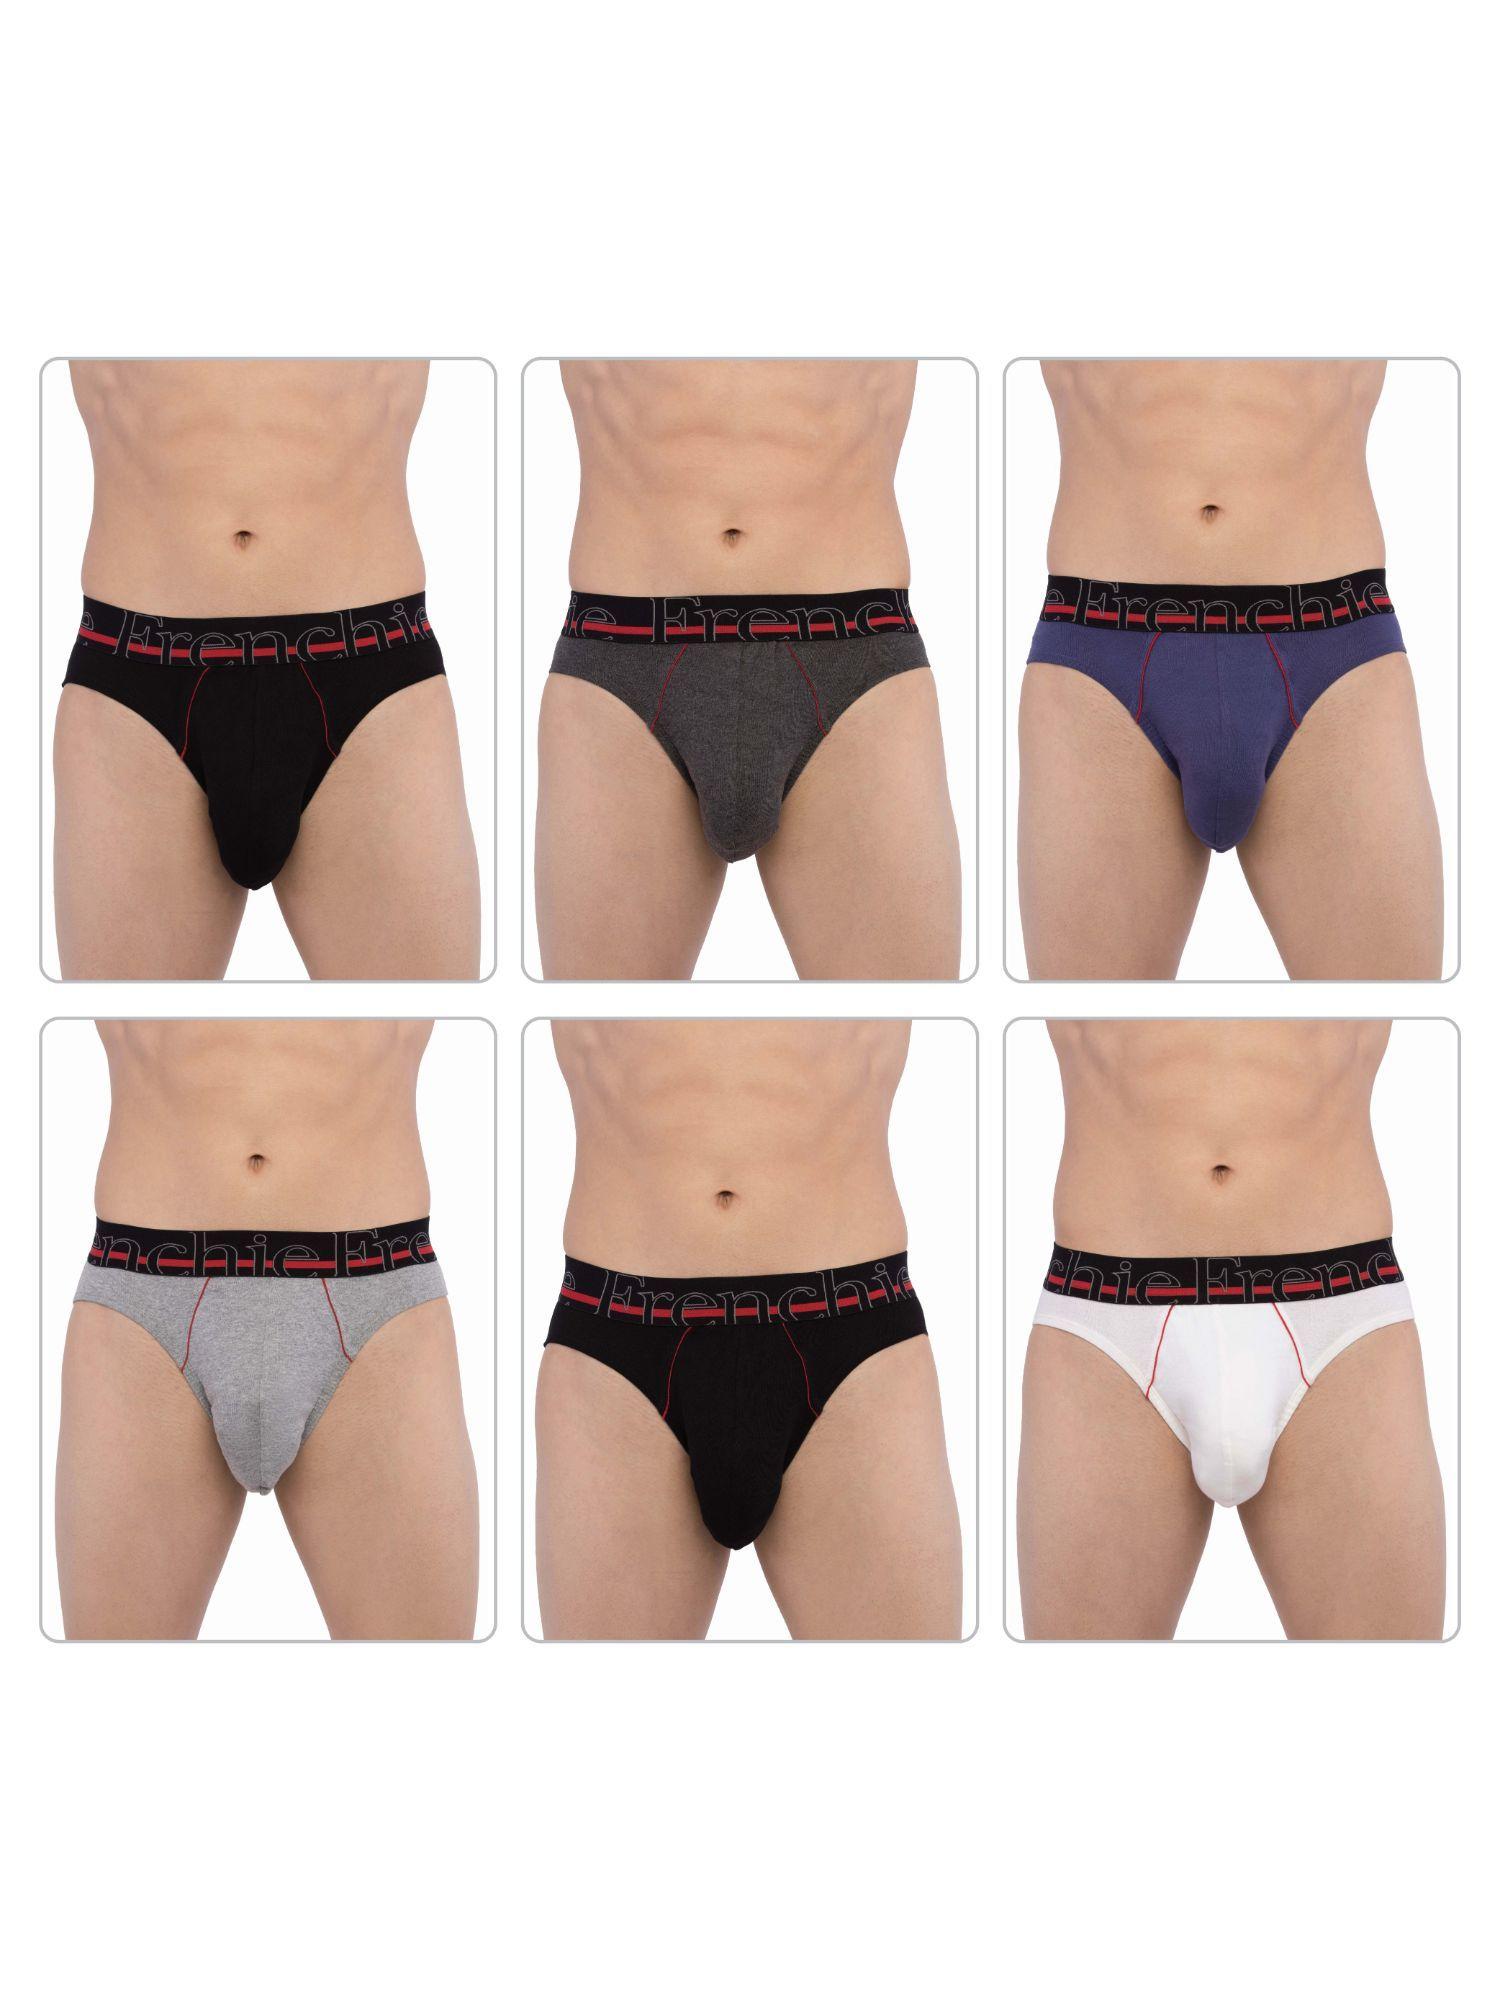 casuals-4002-mens-cotton-briefs-assorted-colours-(pack-of-6)